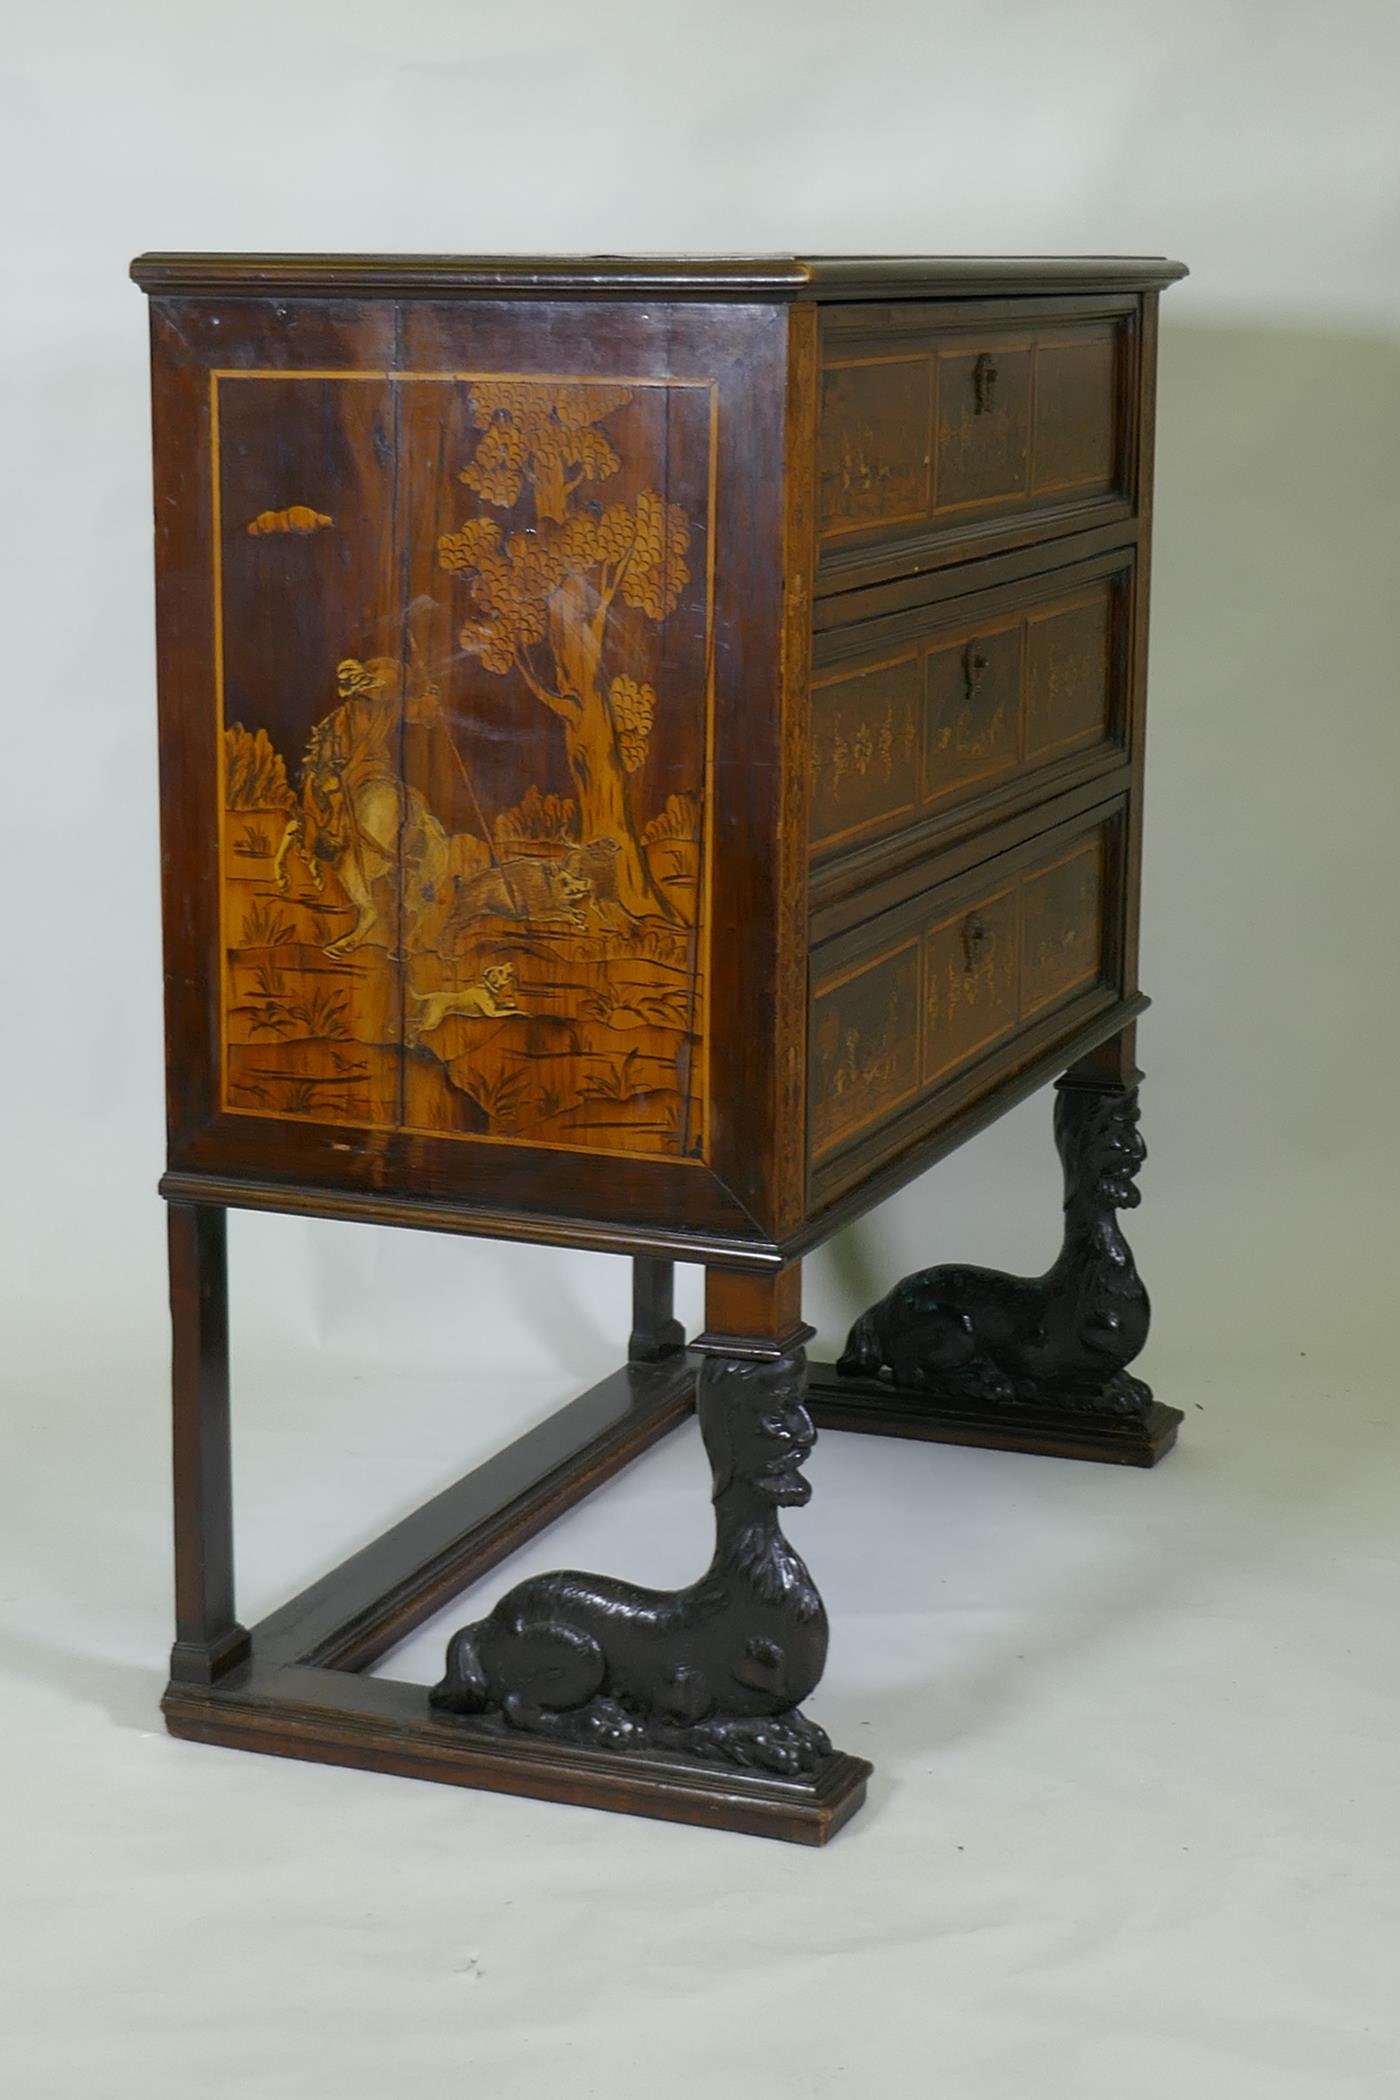 C18th/C19th Italian/Swiss marquetry inlaid walnut chest of three drawers, inlaid with hunting - Image 4 of 10